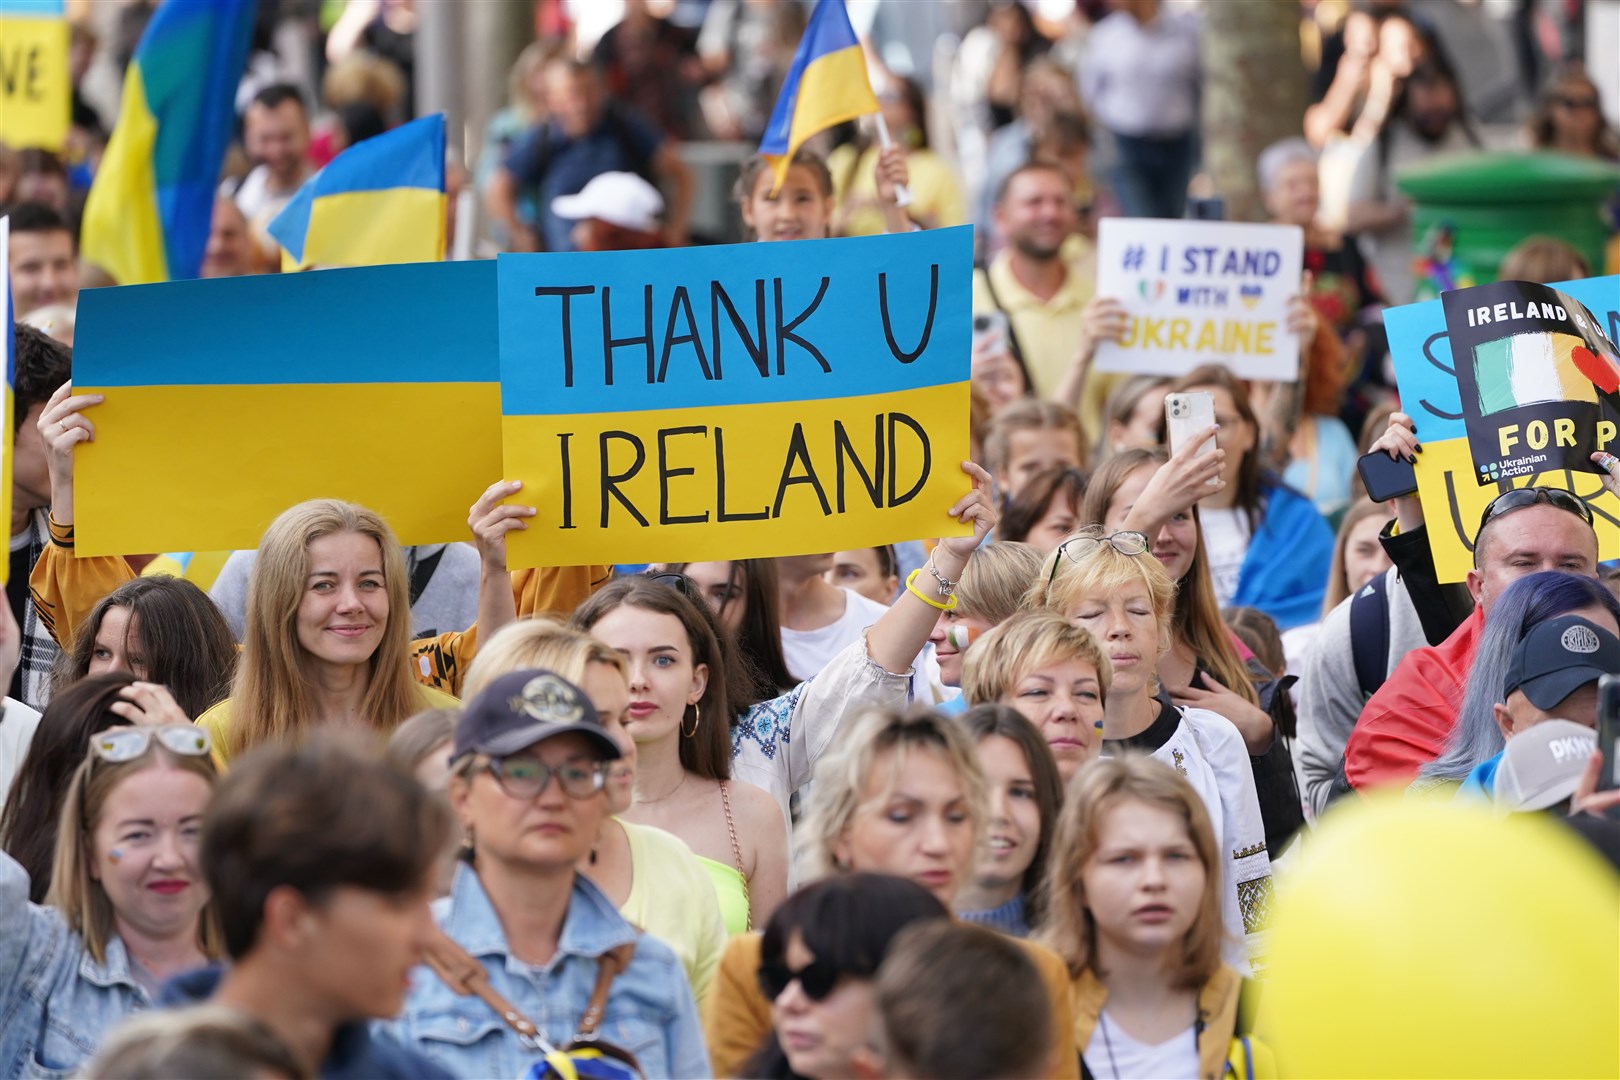 People gather for a Ukraine independence rally in Dublin last week (Brian Lawless/PA)